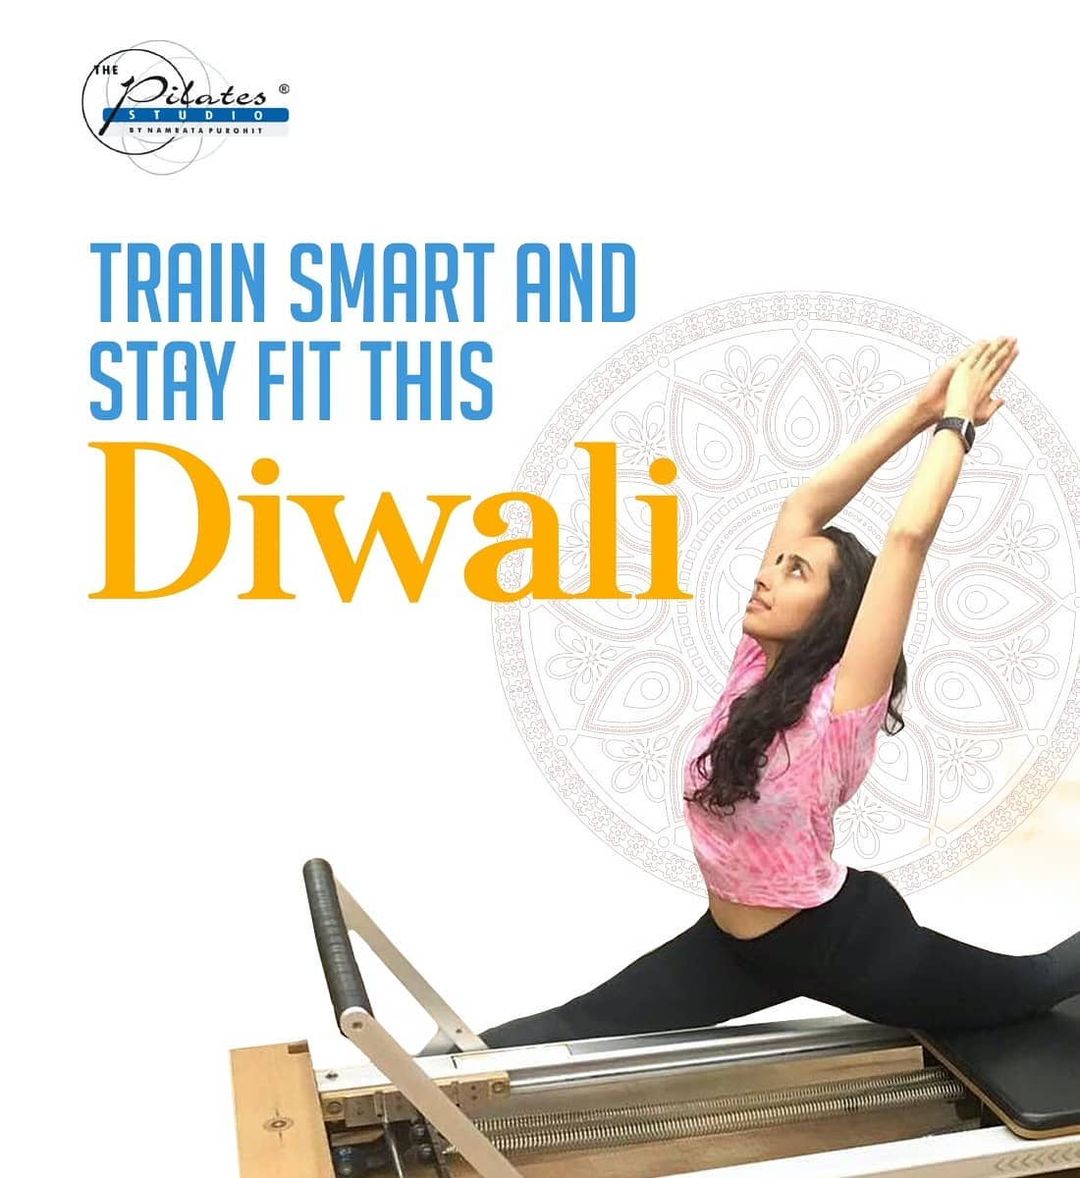 Take care and love your body. It's the only place you have to live in. Happy Diwali 💞
.
.
.
#Diwali #HappyDiwali #FestiveSeason #SeasonsGreetings #diwali2020 #DiwaliCelebrations #pilates #stayfit #Healthy #Strong #trainsmart #love #peace #festivaloflights #exercise #sweets #Fit #FitIndia #HumFitTohIndiaFit  #PilatesCommunity #Fitness #FitnessEnthusiasts  #Stretch #WorkOut  #Relax #FitnessMotivation #InstaFit